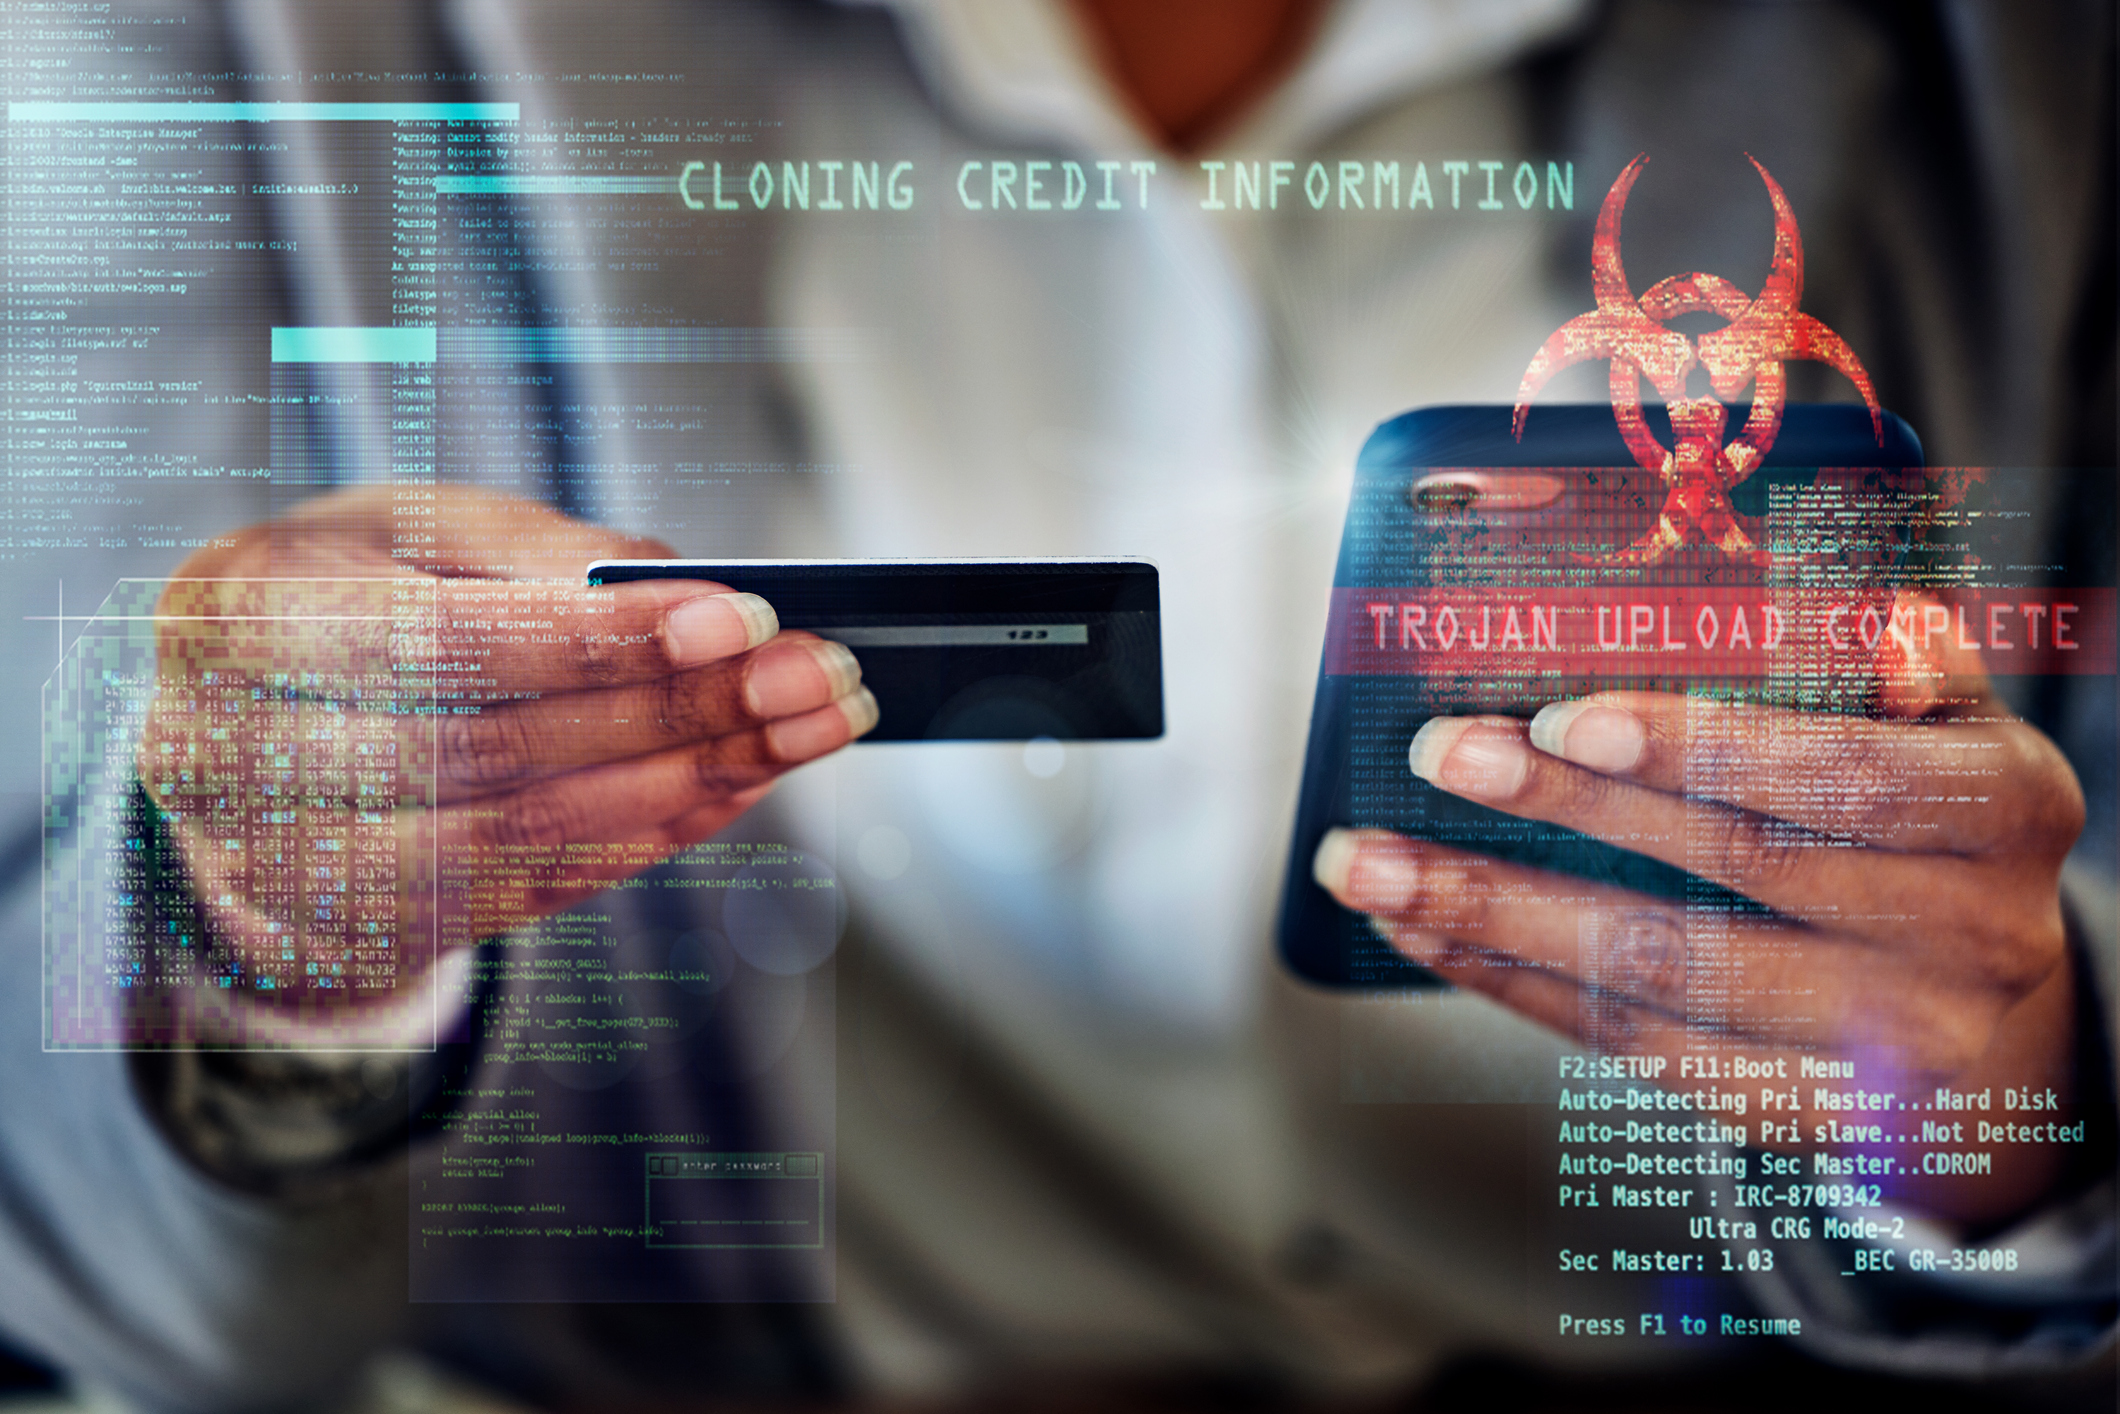 Cyber, digital and virus of criminal fraud breaking security with trojan and cloning software. Hands of an individual with malicious intent to steal, banking and finance information for ecommerce.